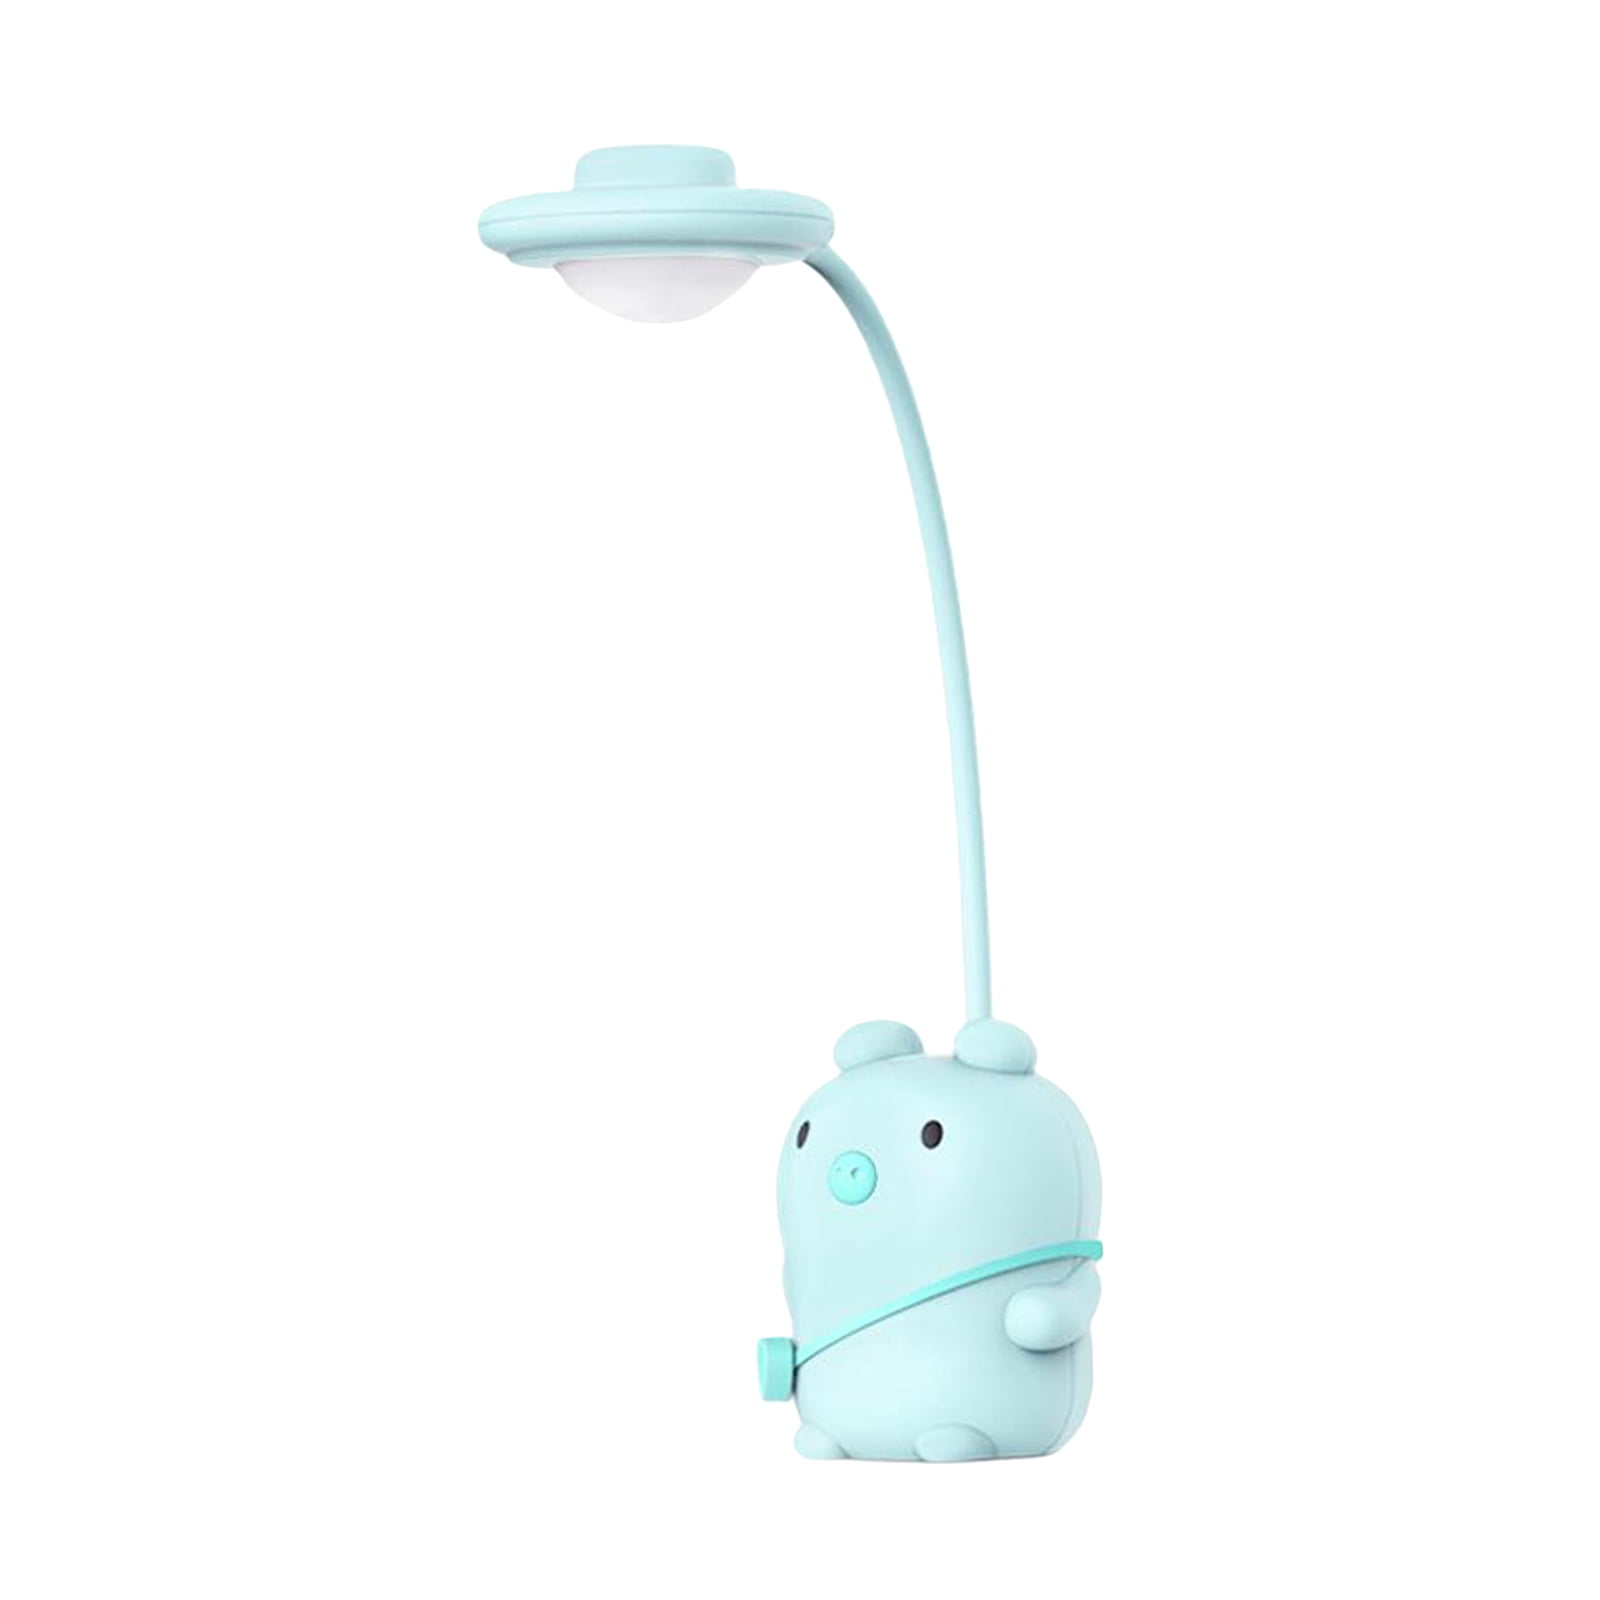 LED Night Light Bedside Table Light Reading Night Lamp Convenient to Use 